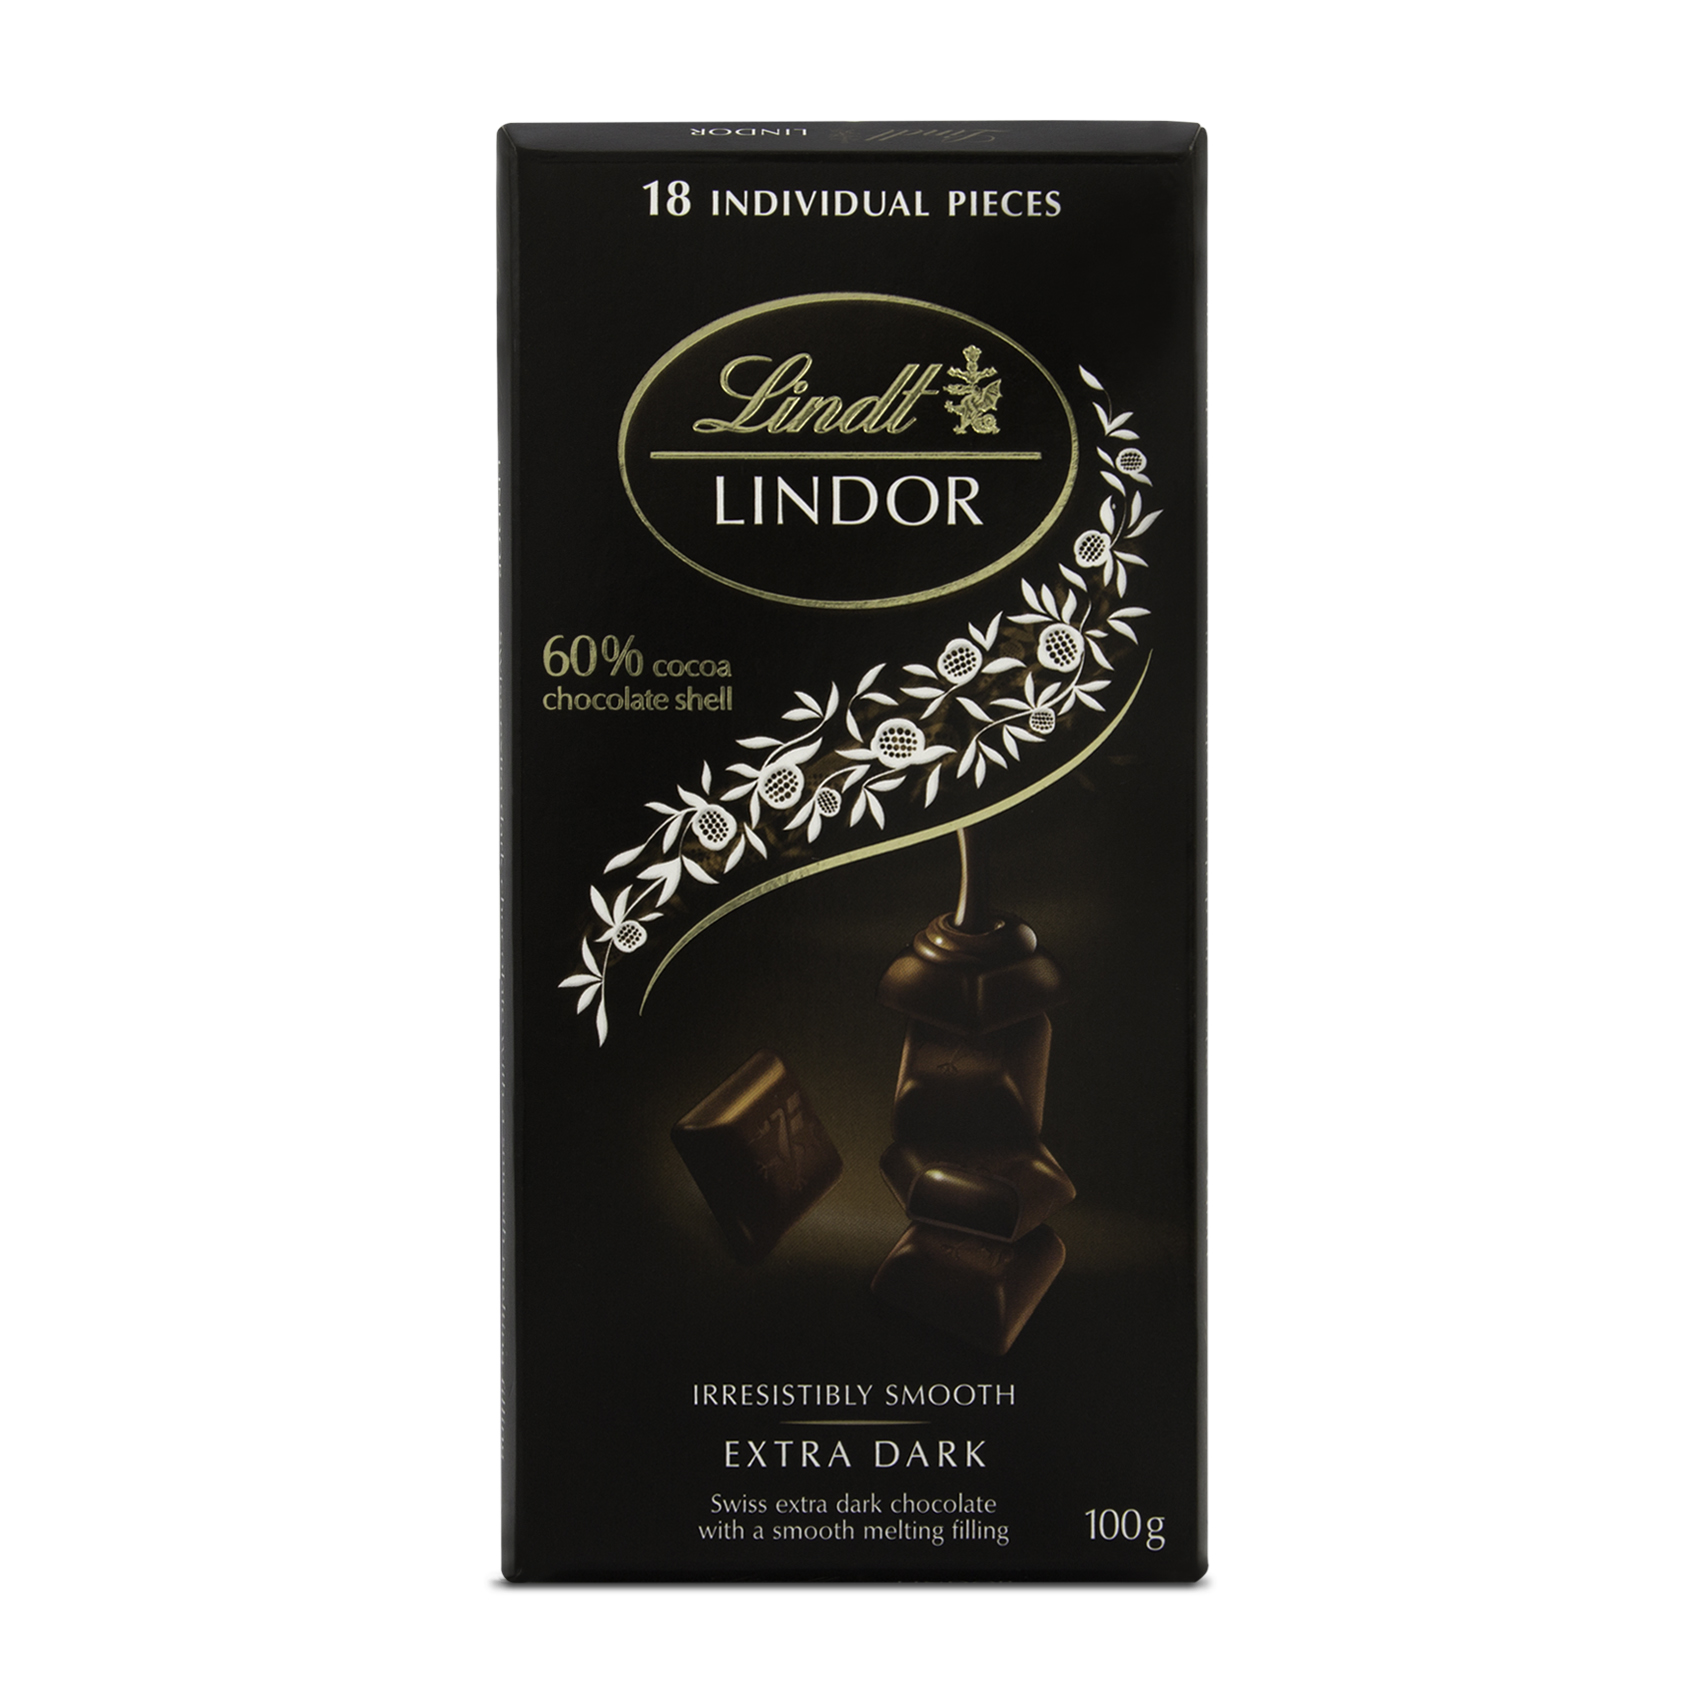 Les Grandes - Blanc Amandes 150g, made by Lindt - chocolate from Sw